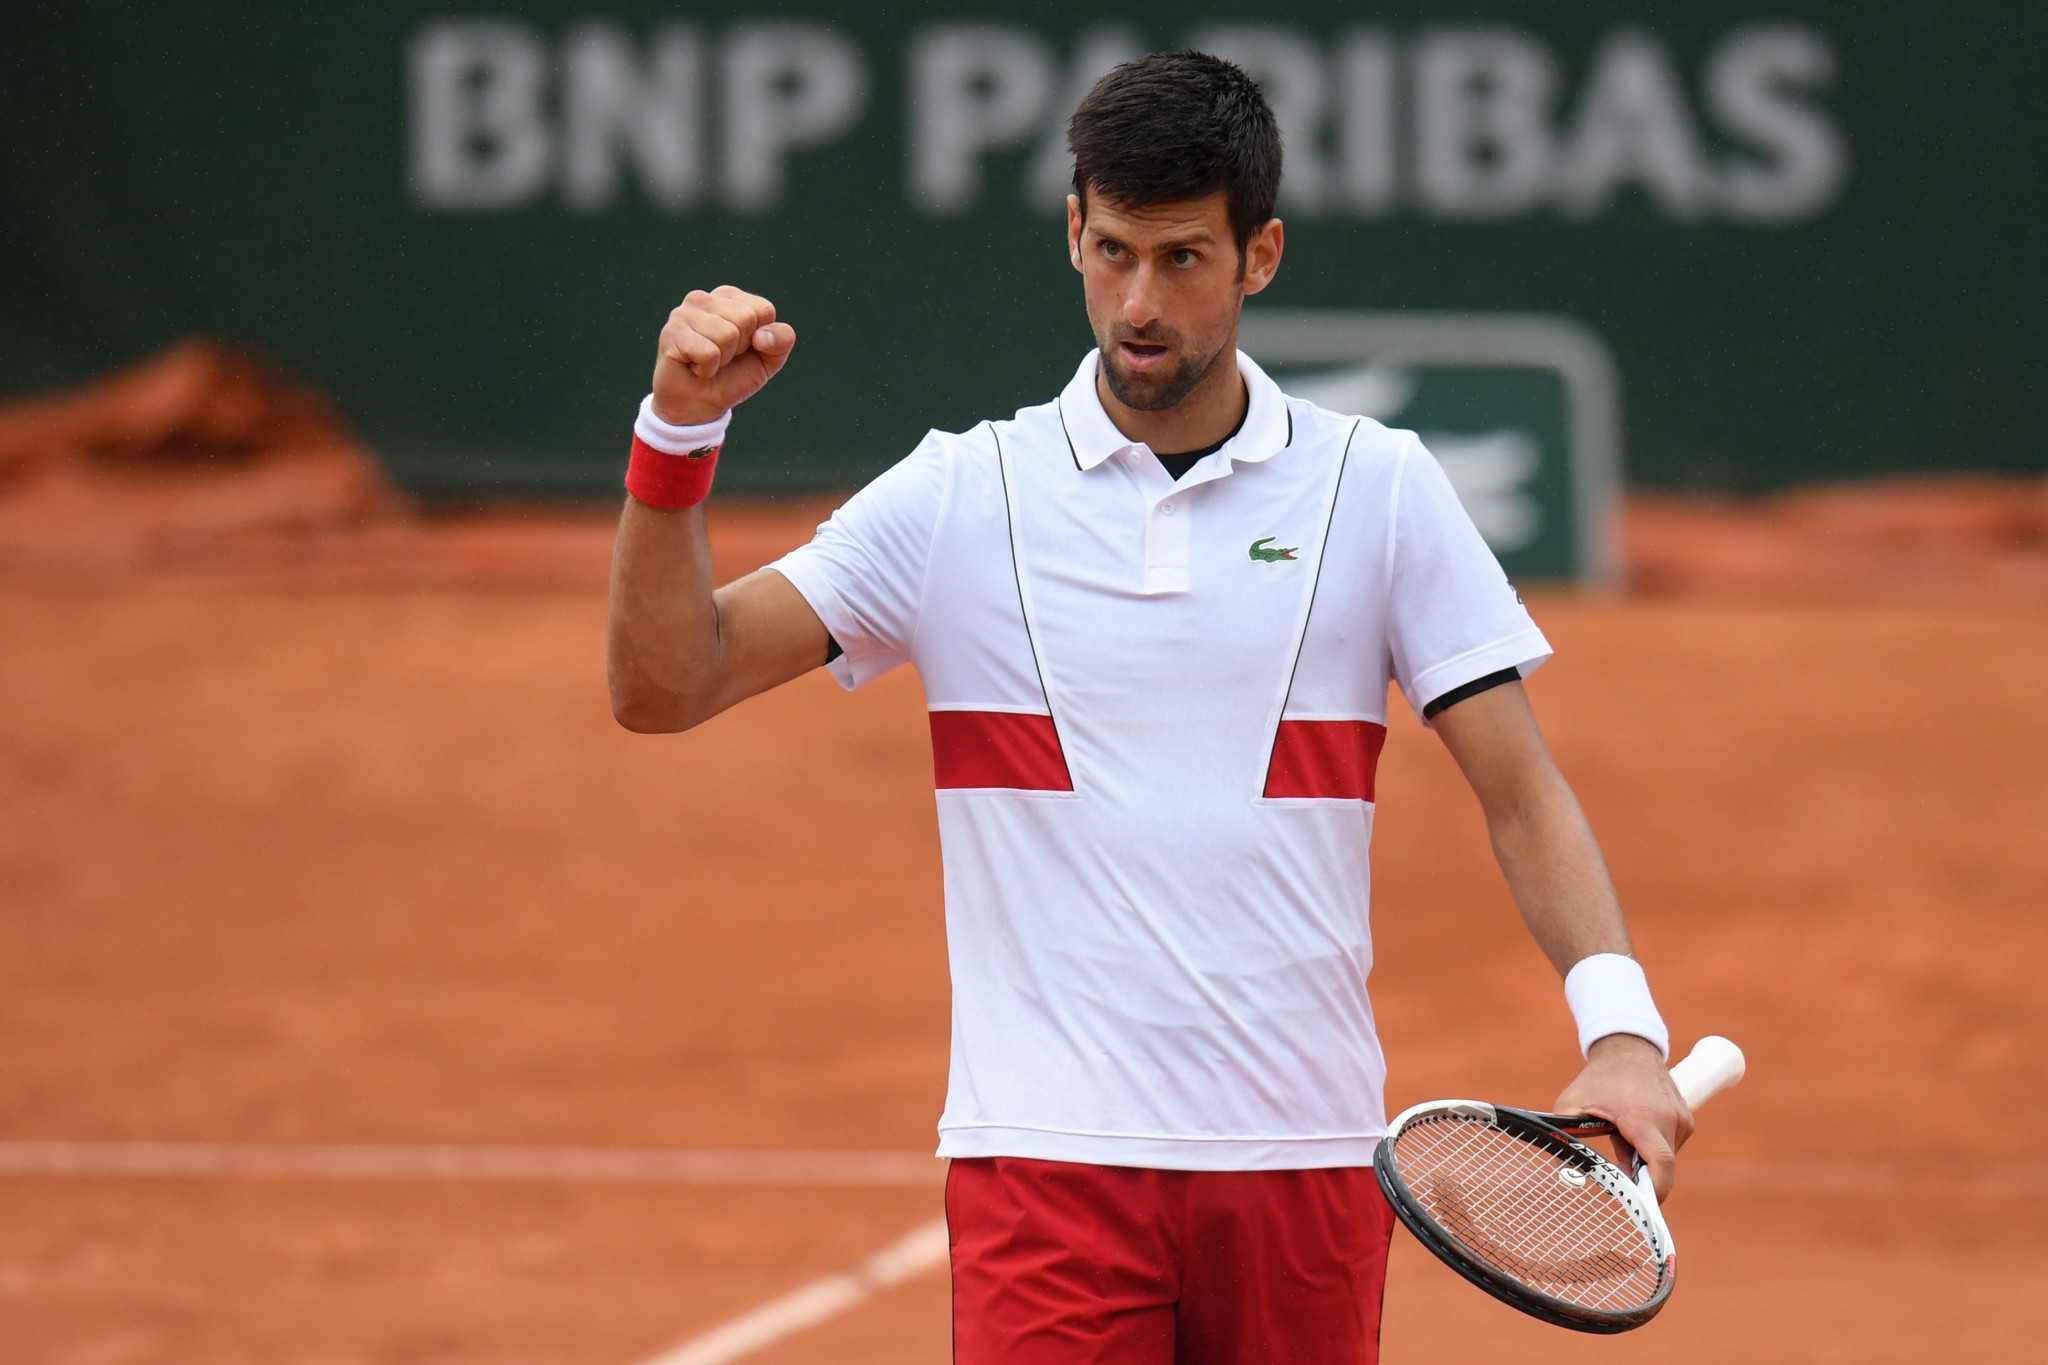 Serbian Novak Djokovic survived his toughest test of the year so far as he battled through to the fourth round of the French Open ©Getty Images